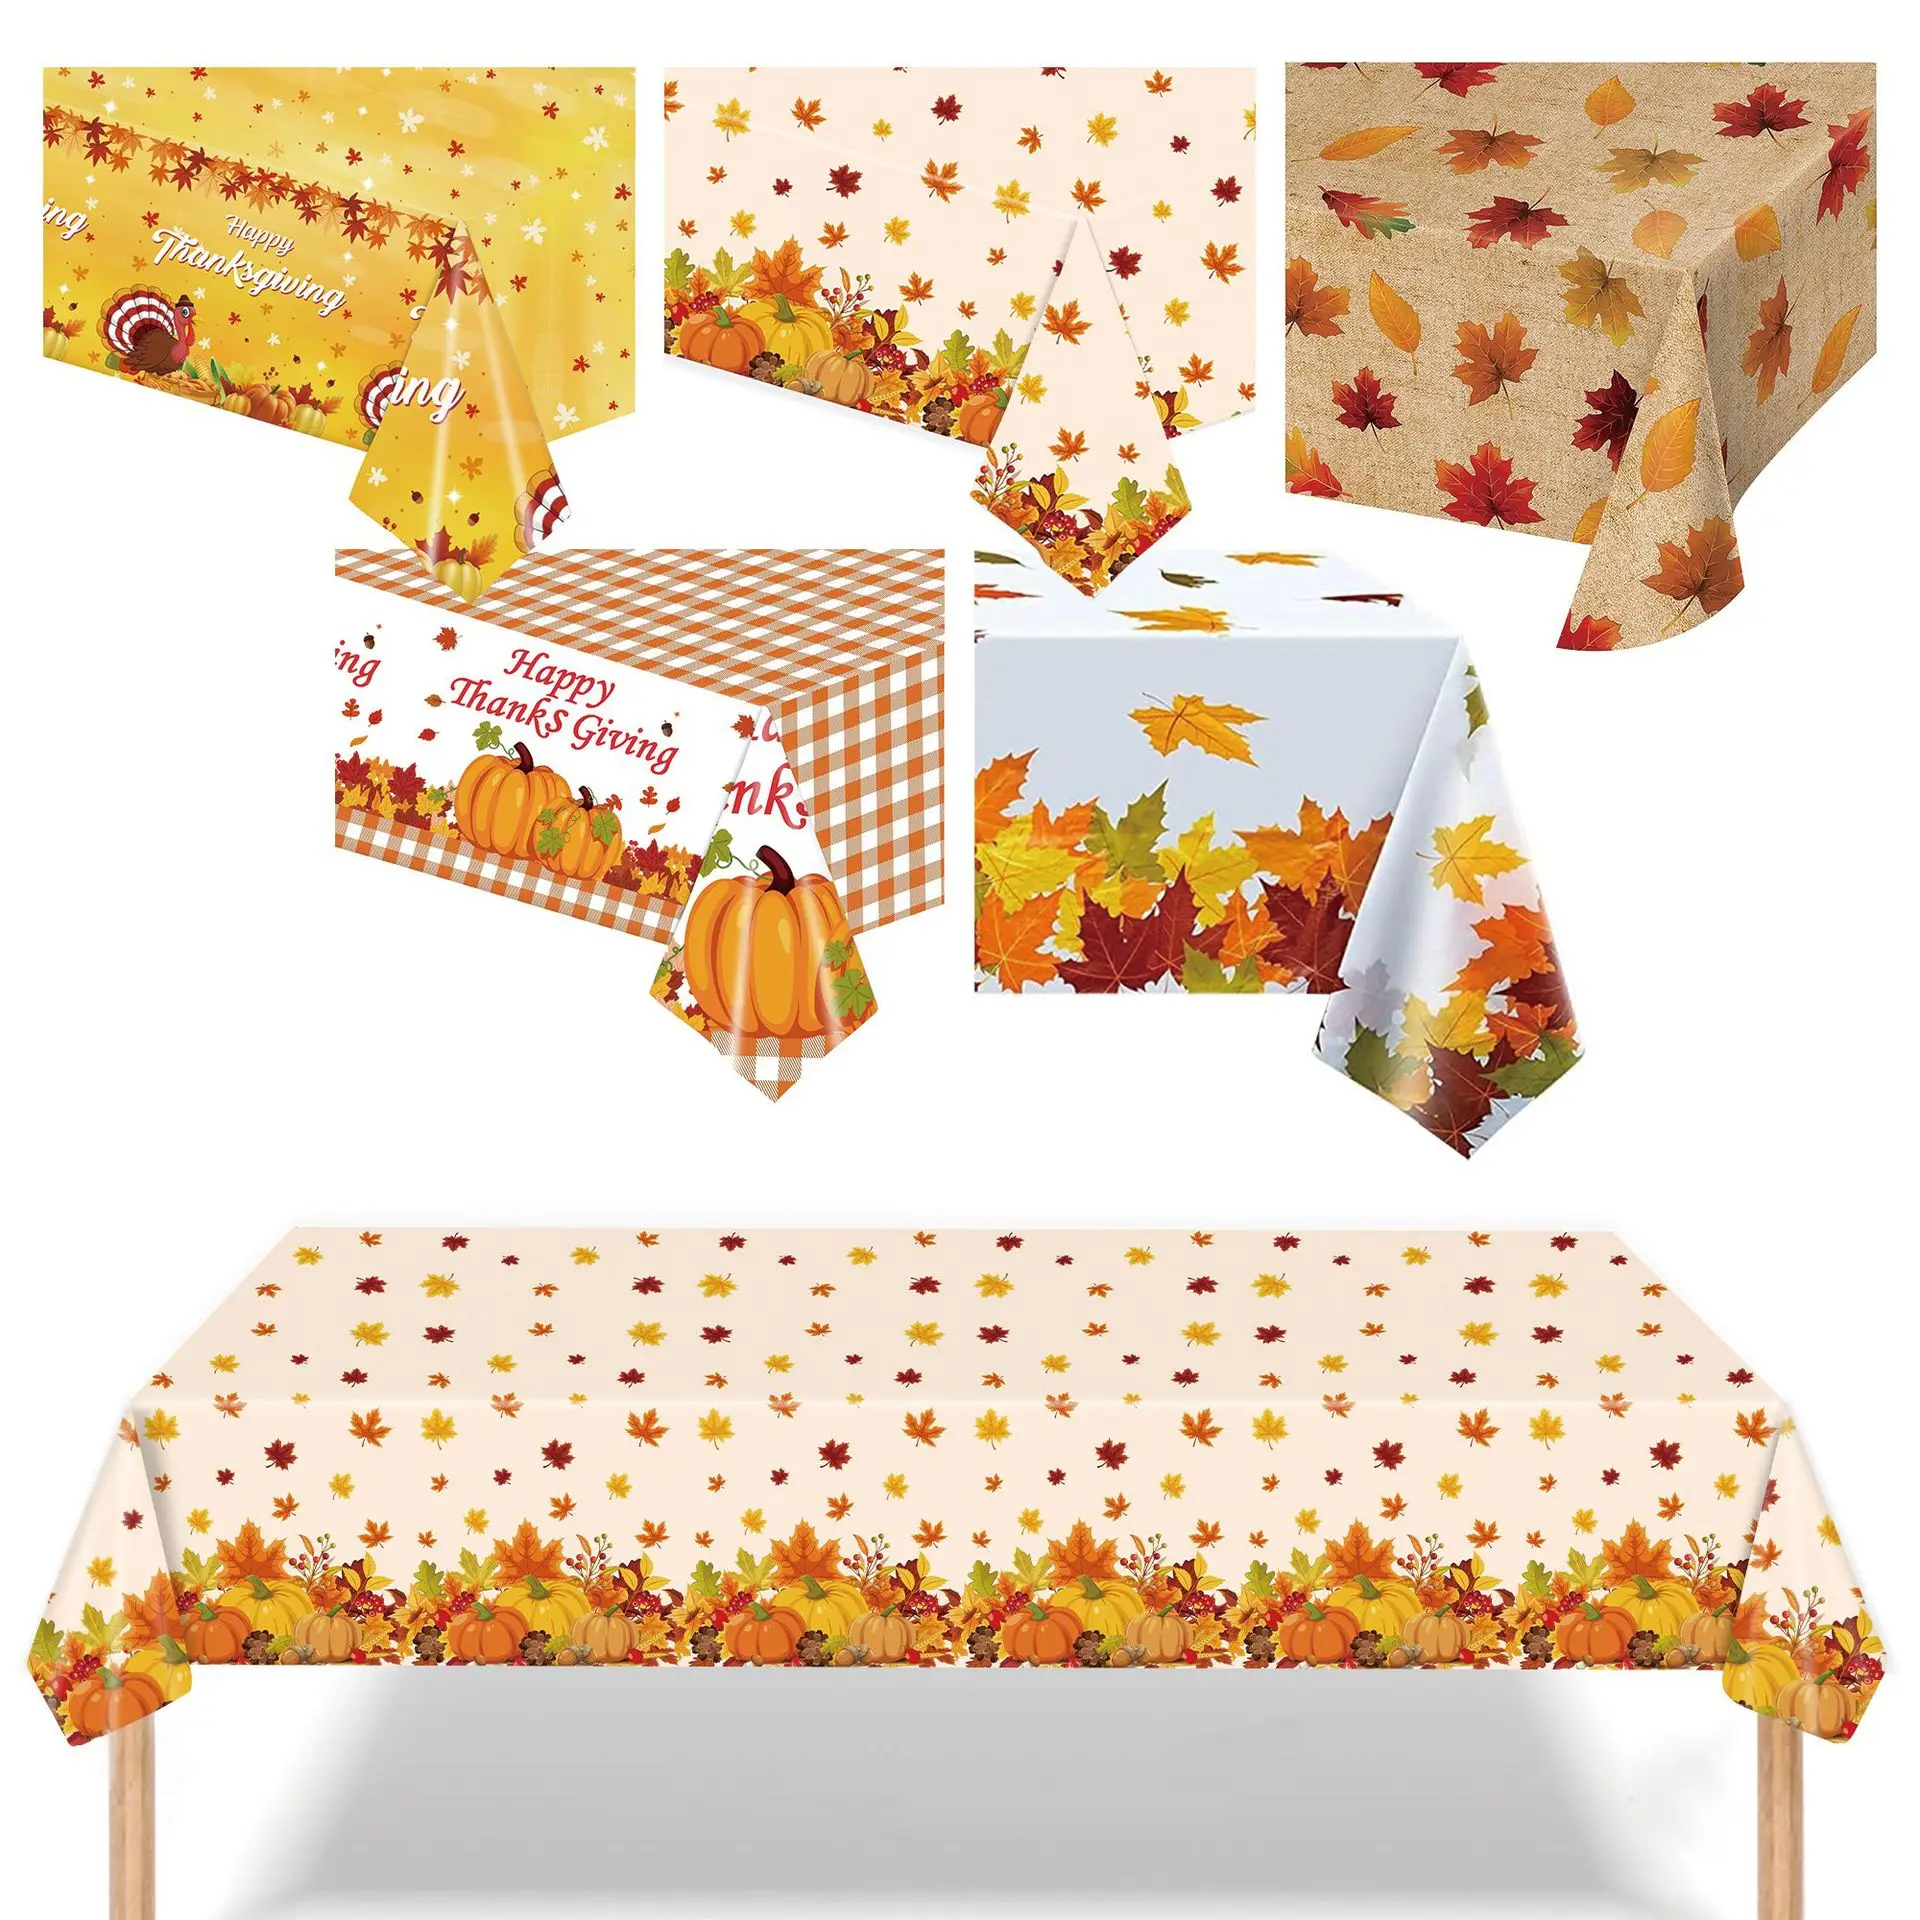 

Thanksgiving Festive Turkey Pumpkin Maple Leaf Theme Party Decorations Disposable Table Cloth Tablecloth